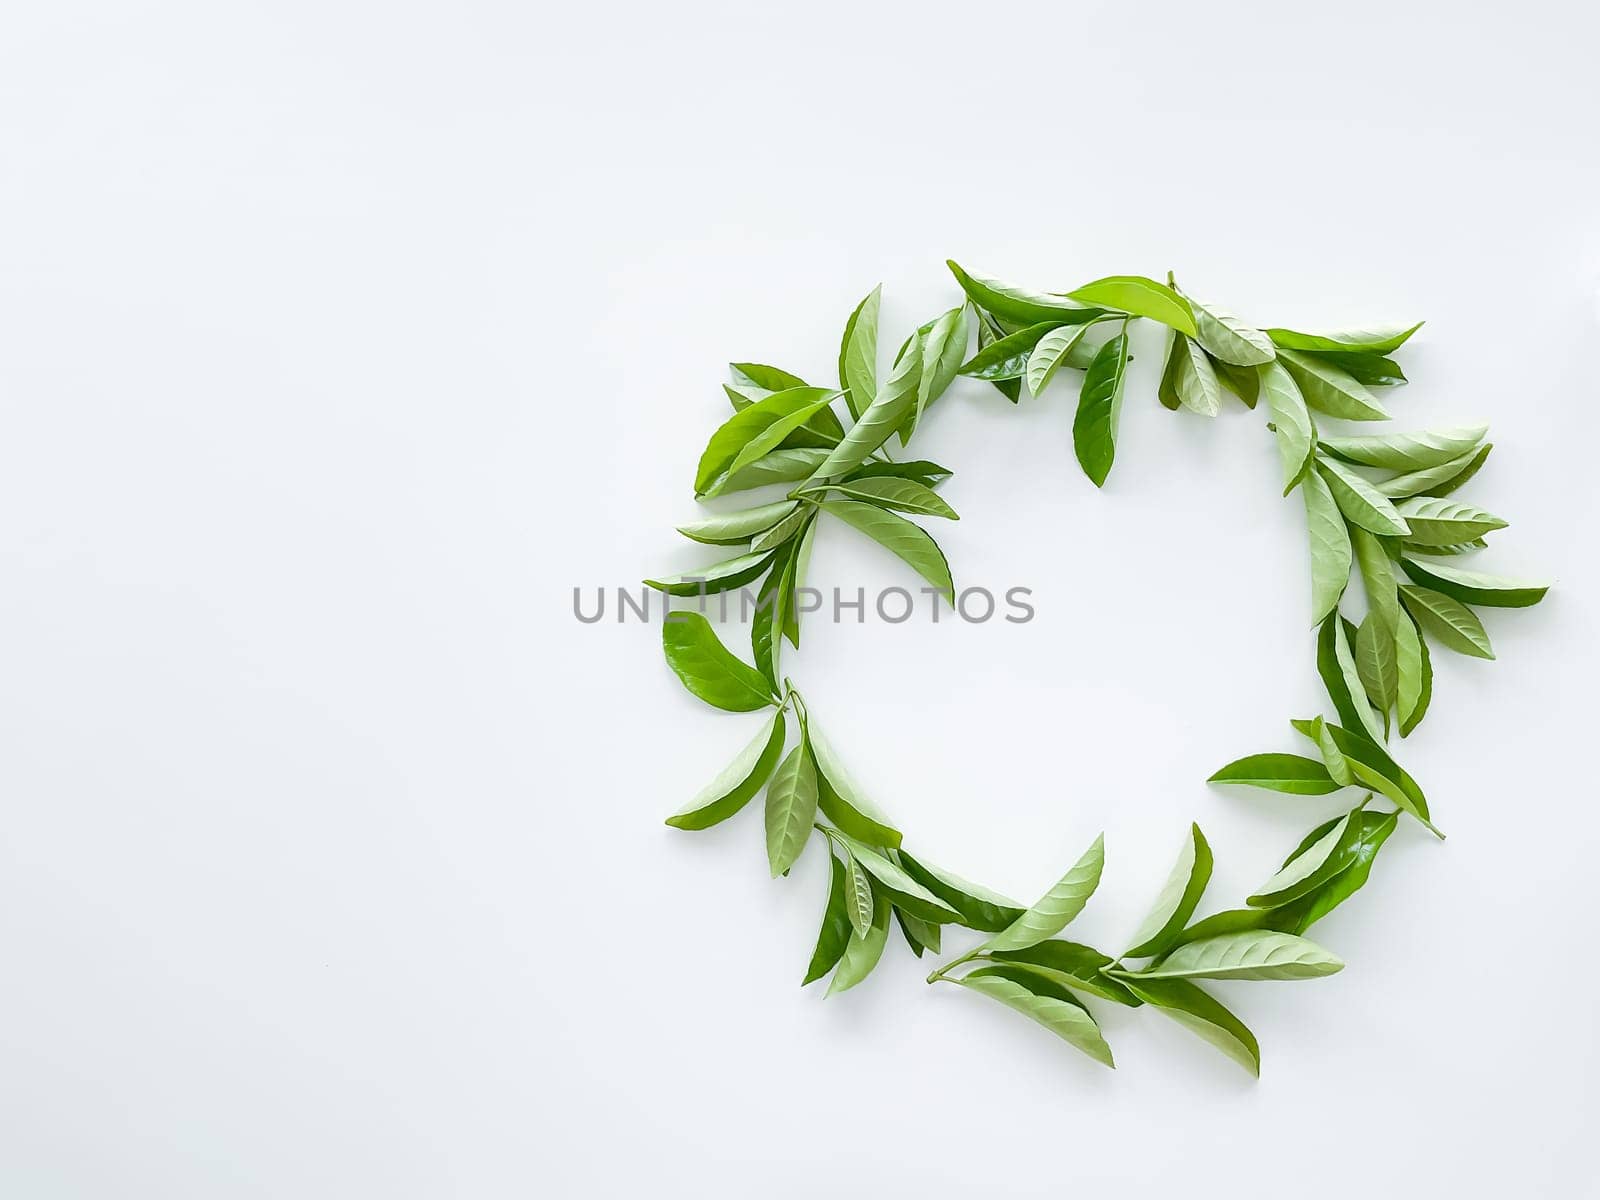 frame workspace with green leaves on white background. lay flat, top view by Lunnica